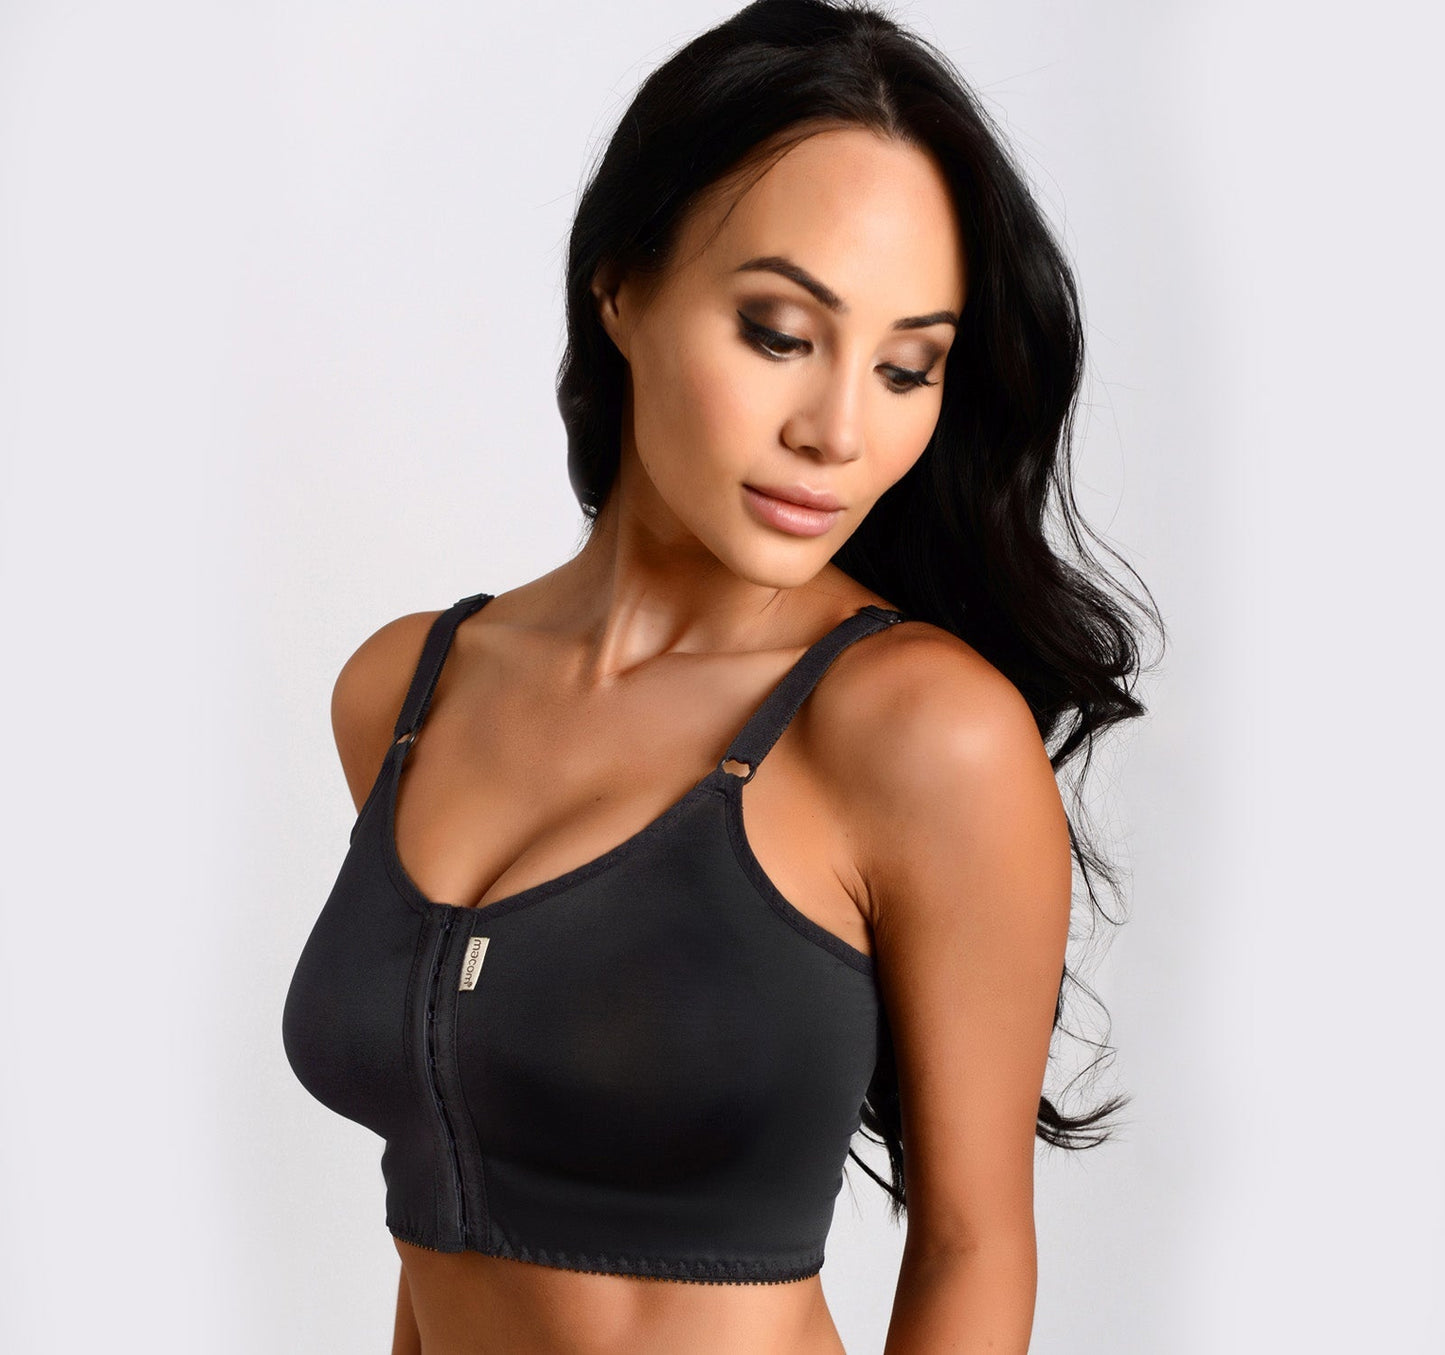 Buy Post Surgery Bras  Compression Bras for Surgical Recovery